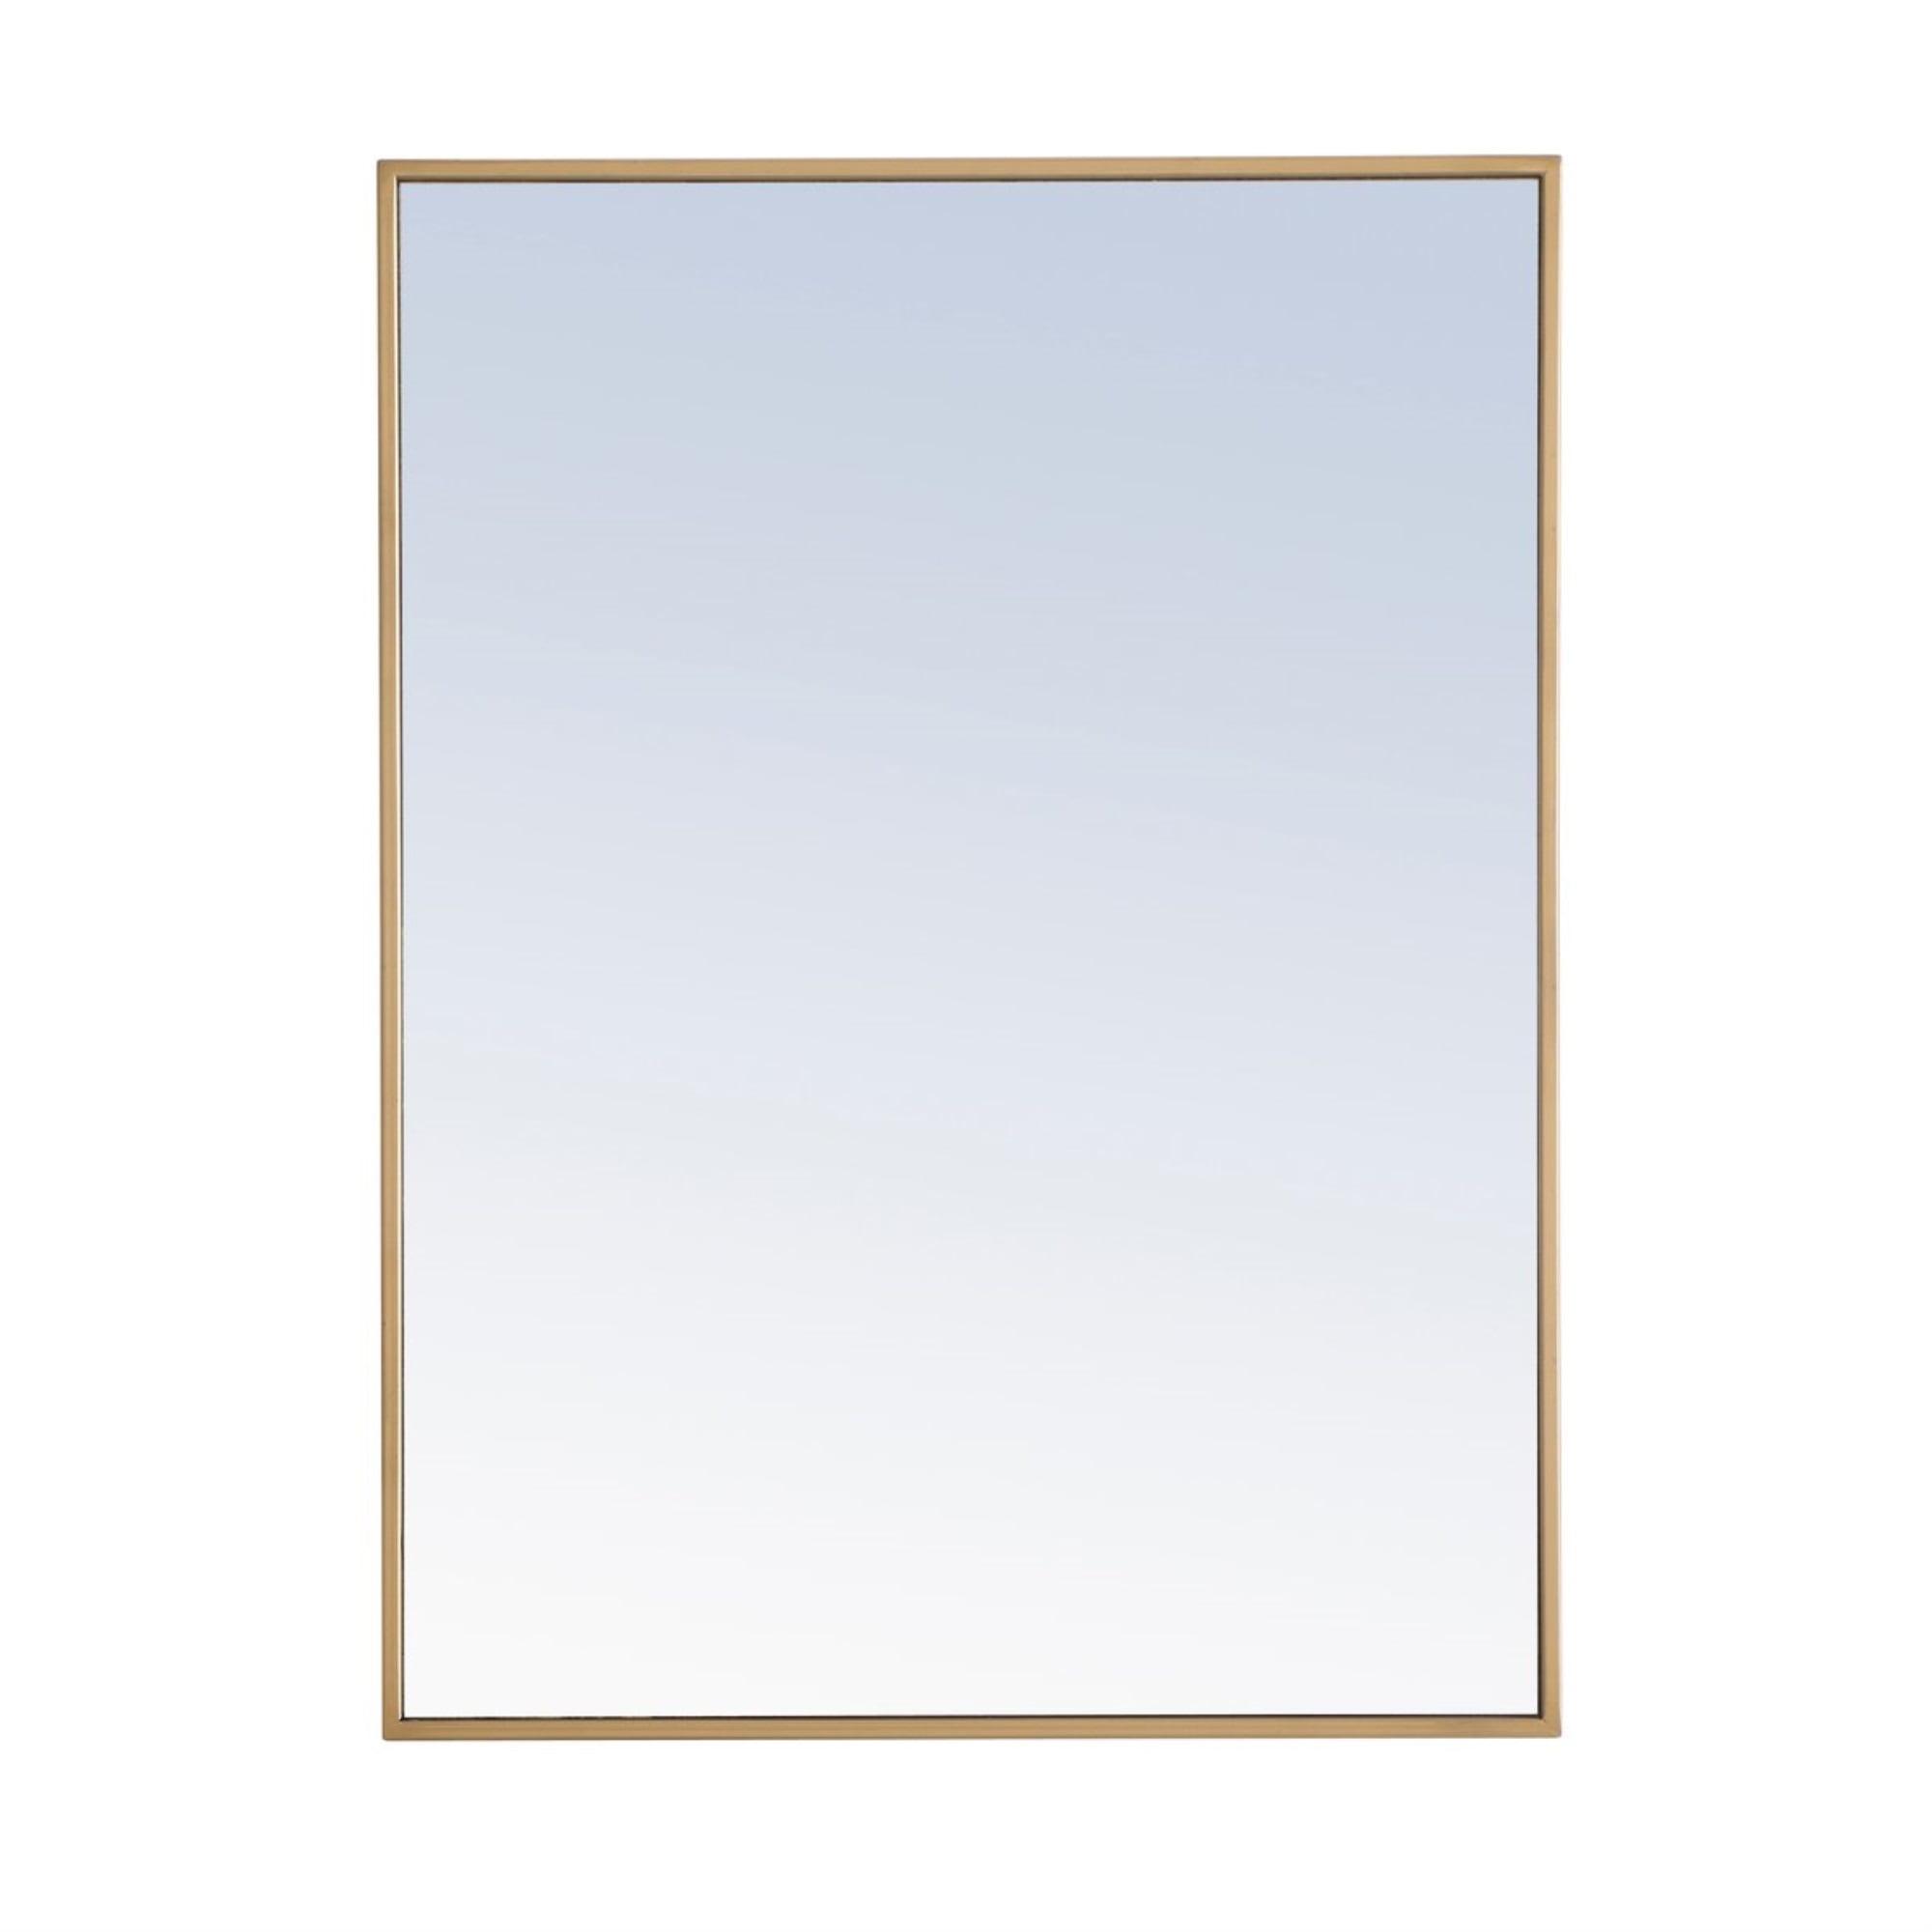 Elegant Contemporary Wood and Metal 24x32 Mirror in Brass Finish